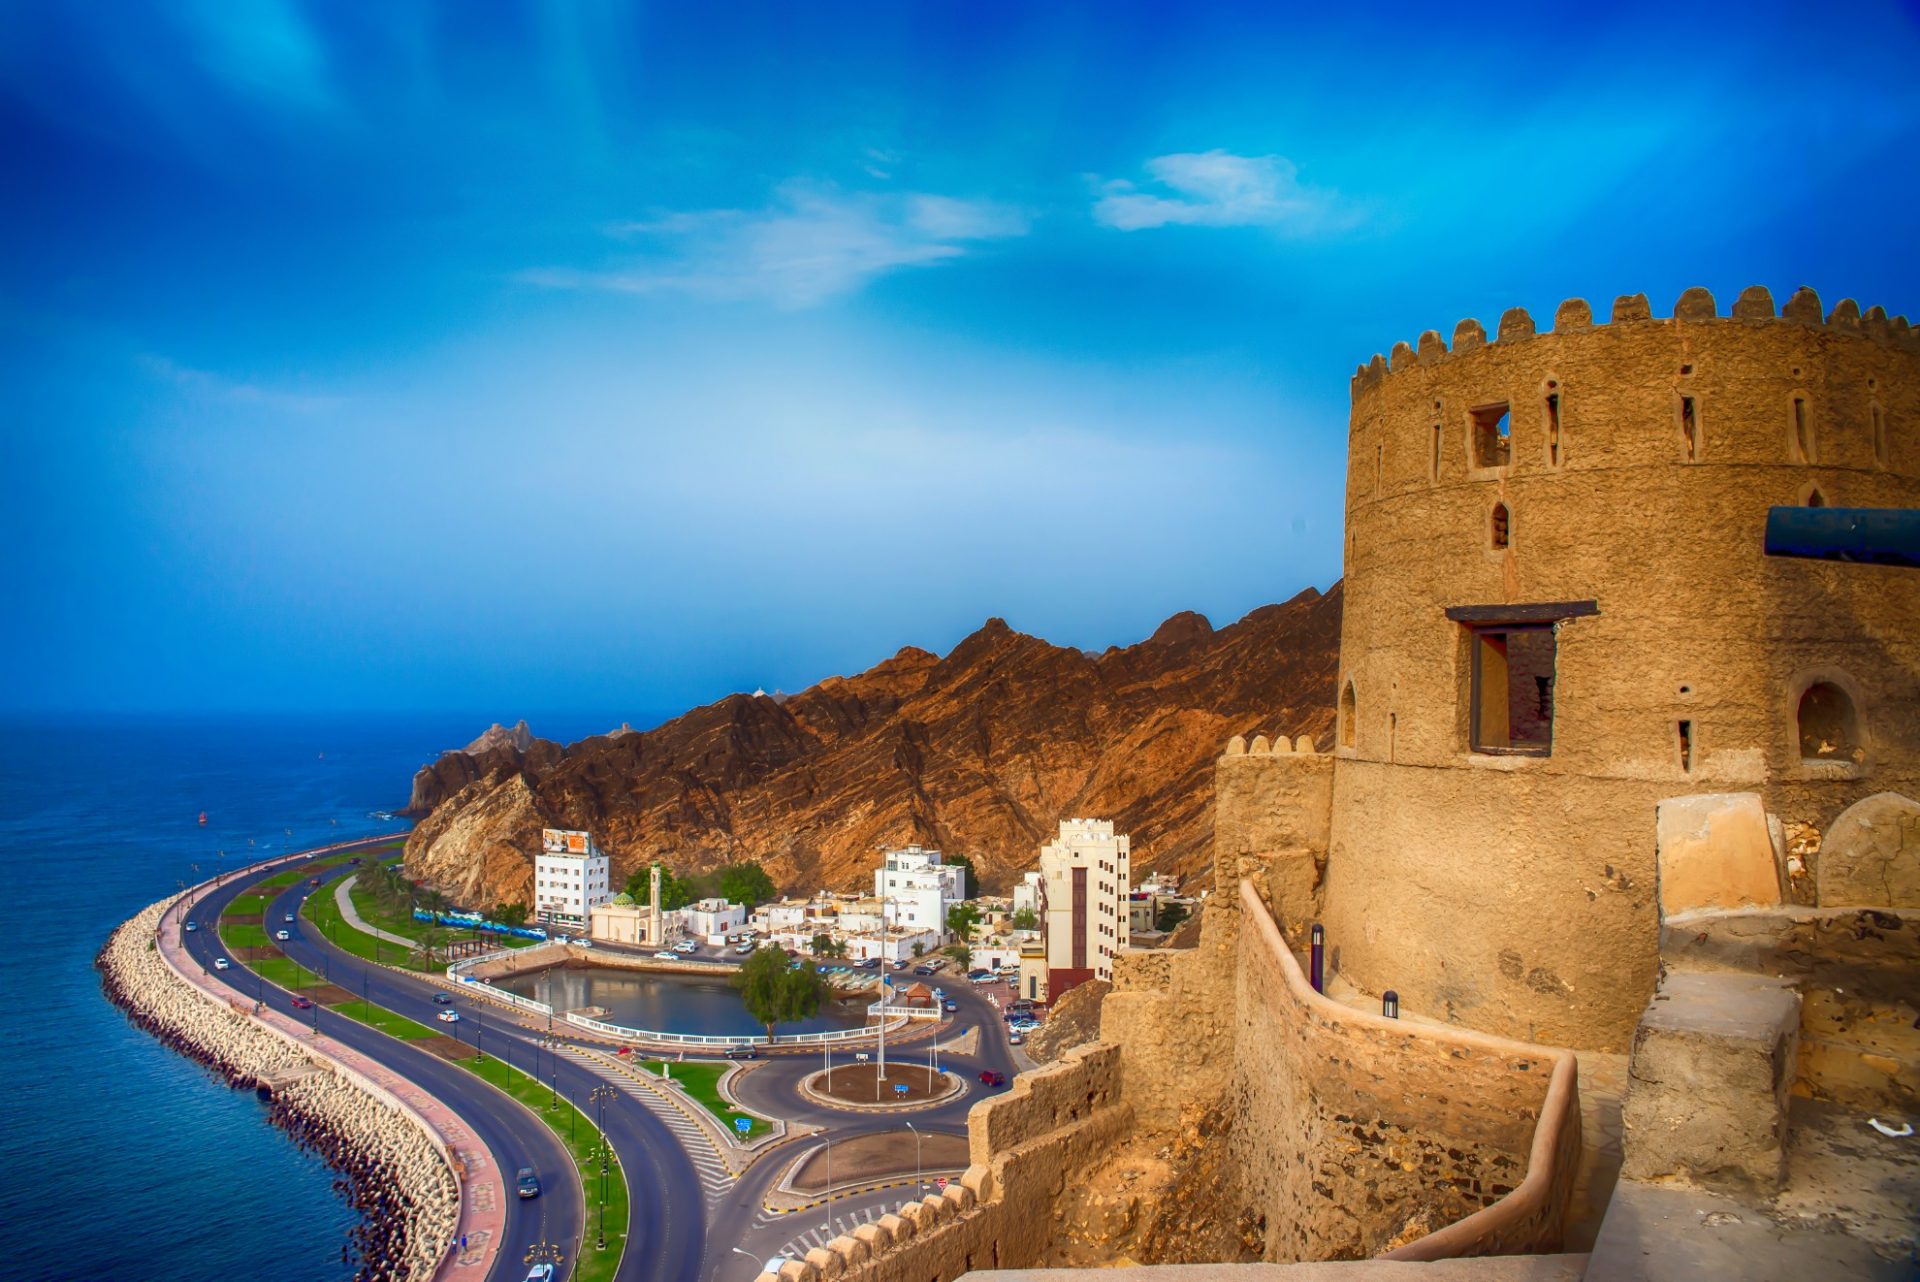 tailor made trips to oman